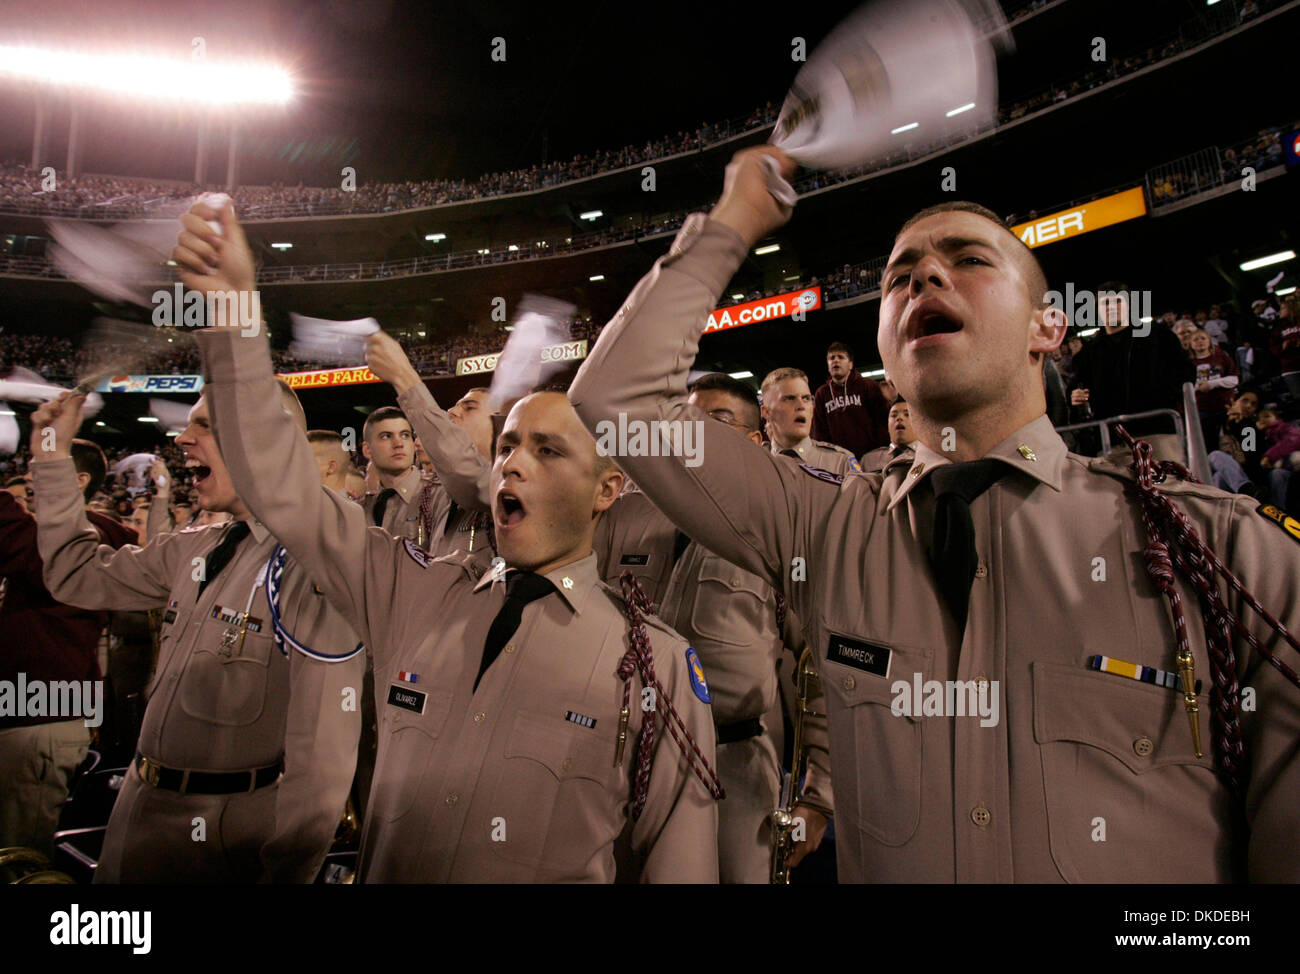 Dec 28, 2006; San Diego, CA, USA; Texas A&M cadet corpsmen MARIO OLIVAREZ  (LEFT) and STEPHEN TIMMRECK celebrate the Aggies move downfield  during the first quarter of  the Pacific Life Holiday Bowl at Qualcomm Stadium.   Mandatory Credit: Photo by Nancee E. Lewis/San Diego Union-Tribune/ZUMA Press. (©) Copyright 2006 by San Diego Union-Tribune Stock Photo